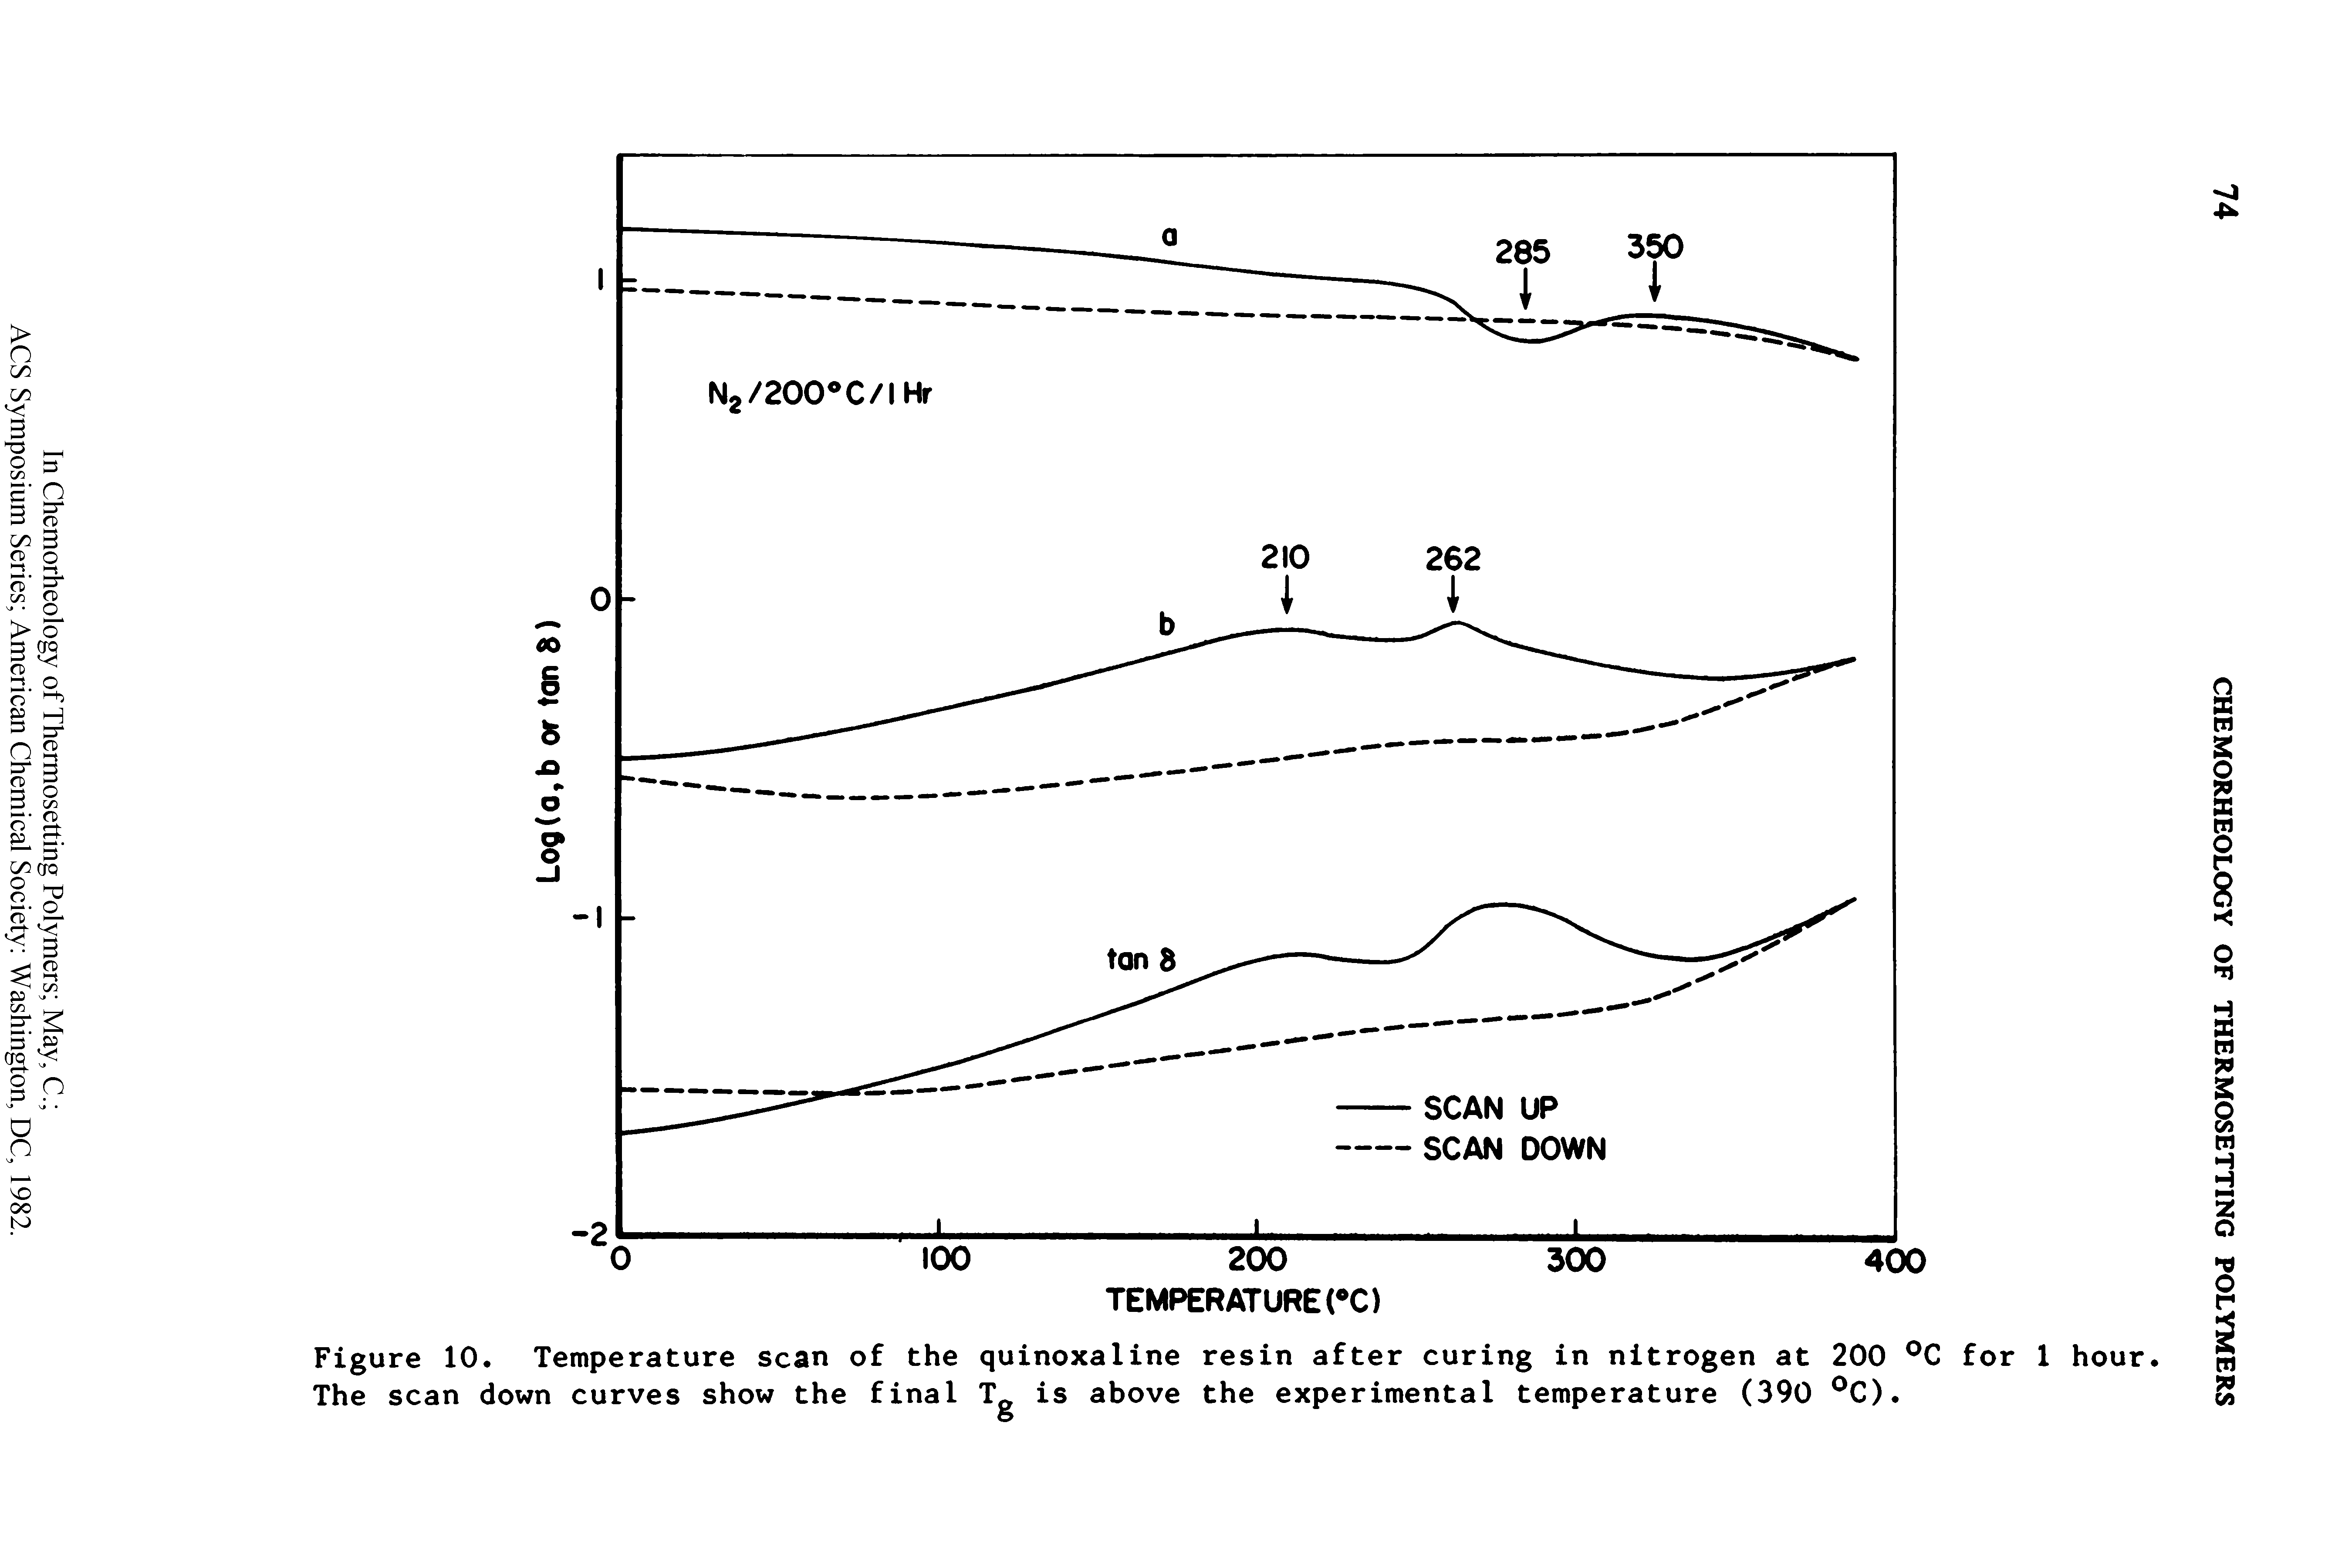 Figure 10. Temperature scan of the quinoxaline resin after curing in nitrogen at 200 for 1 hour. The scan down curves show the final Tg is above the experimental temperature (390 C).